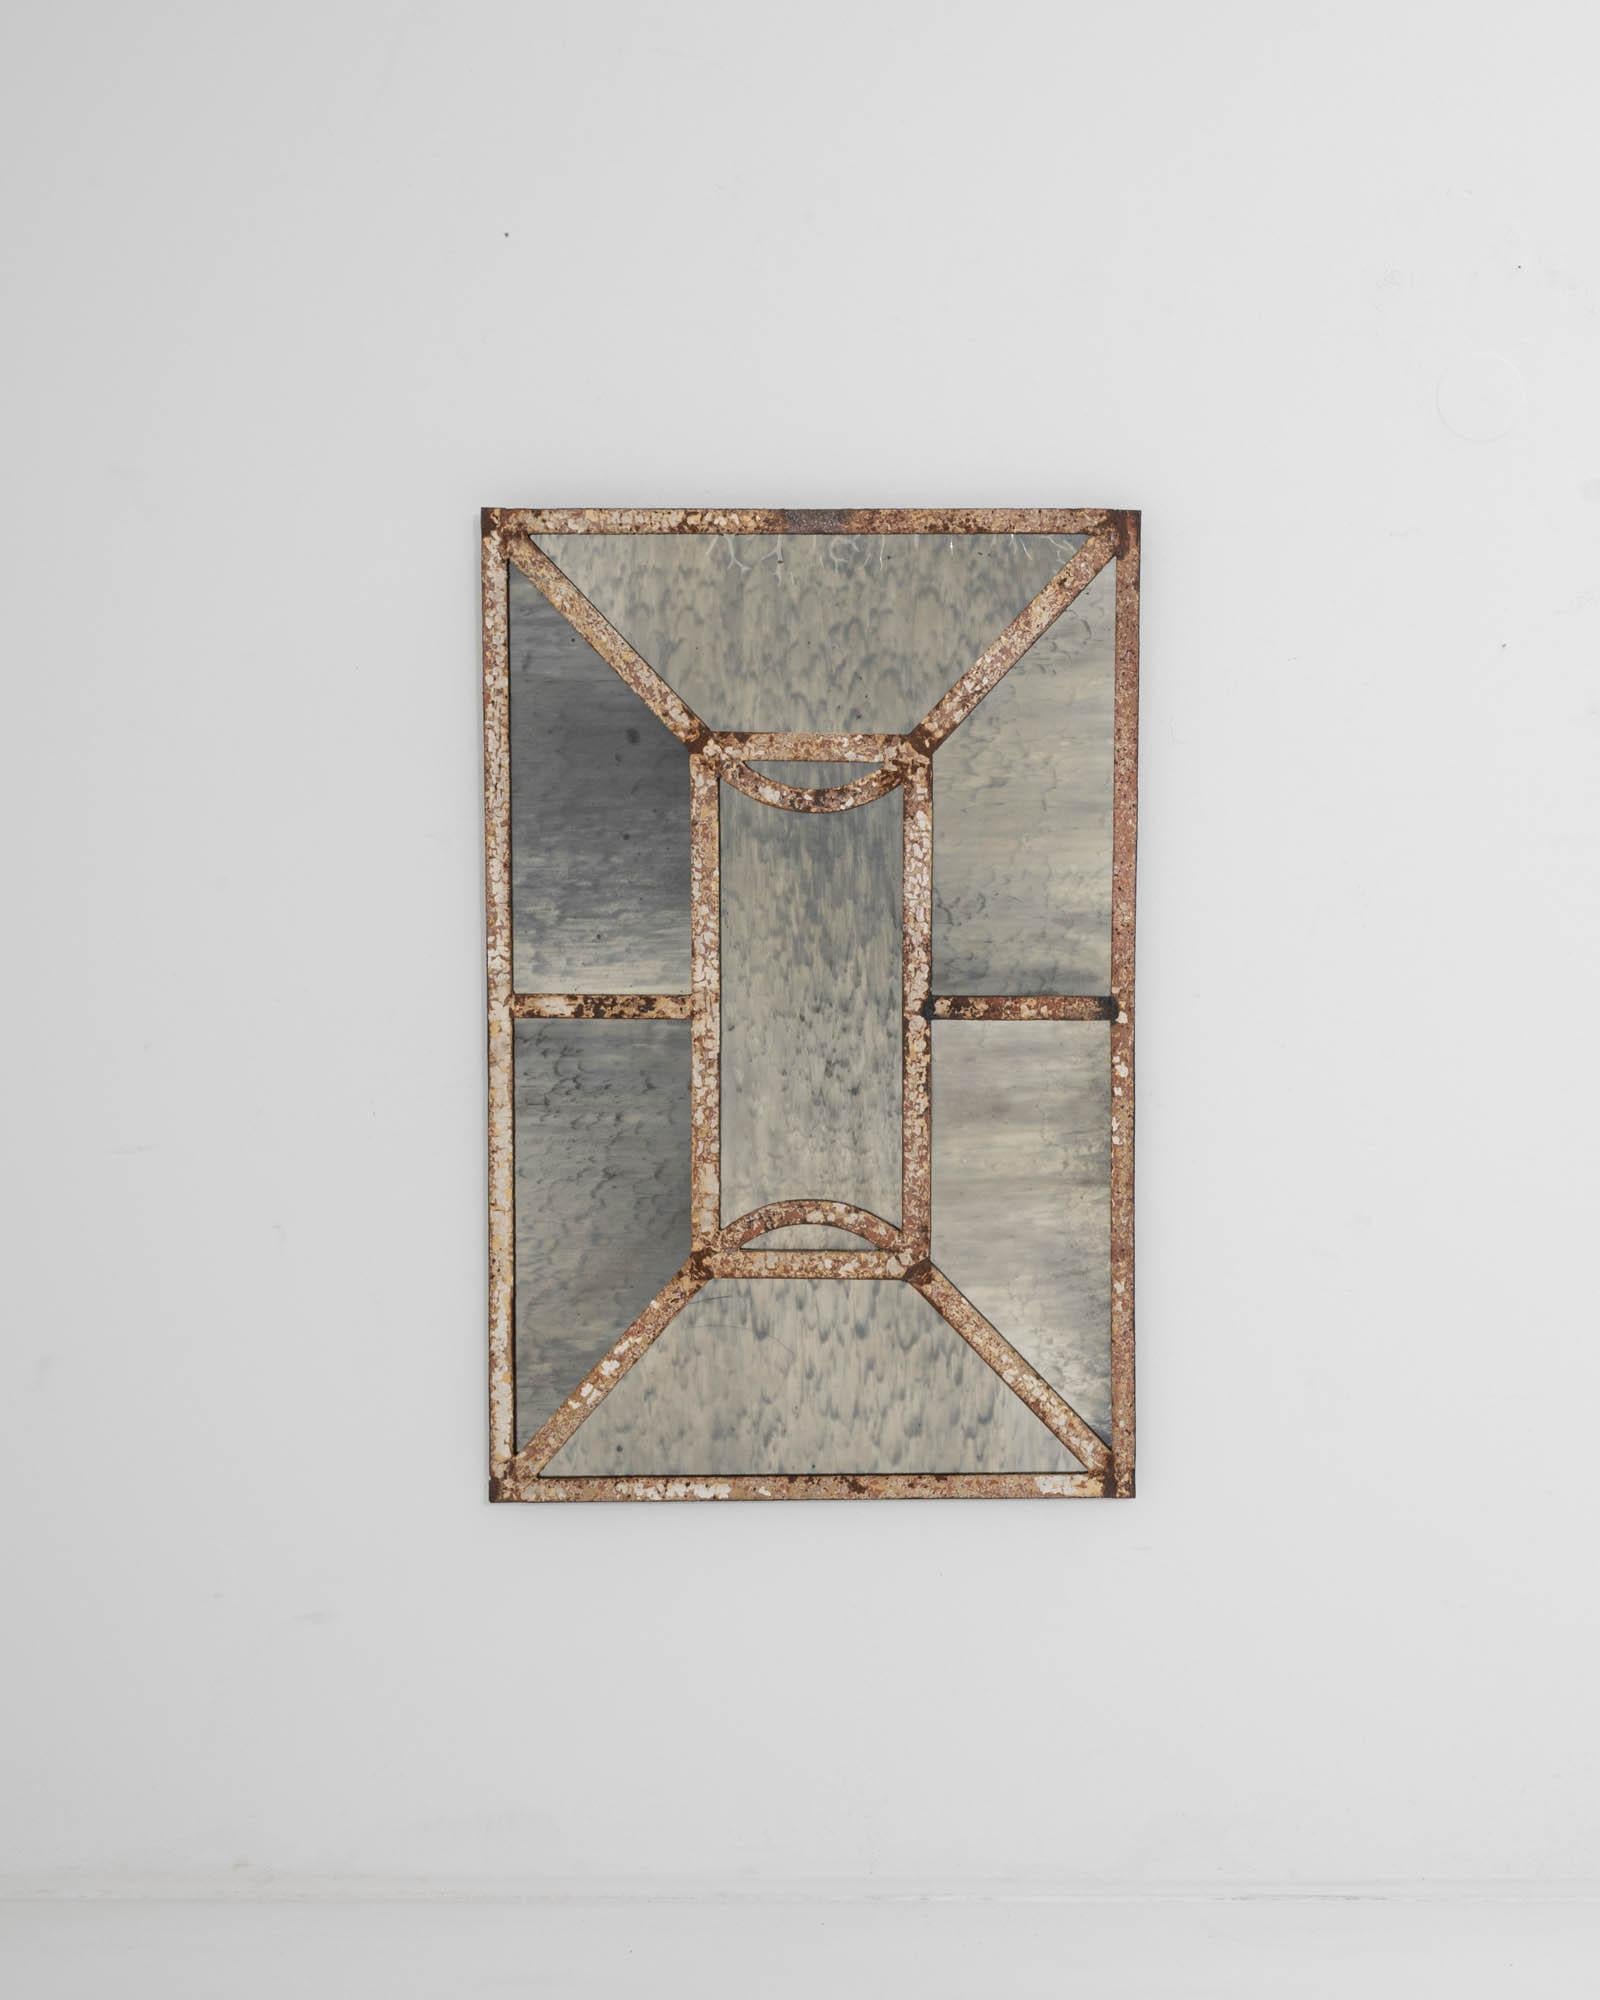 An elegant geometric design and an enigmatic patina give this vintage mirror an intriguing sculptural quality. Made in France in the 20th Century, the metal mullions which traverse the glass create a pattern of angular lines and streamlined curves,